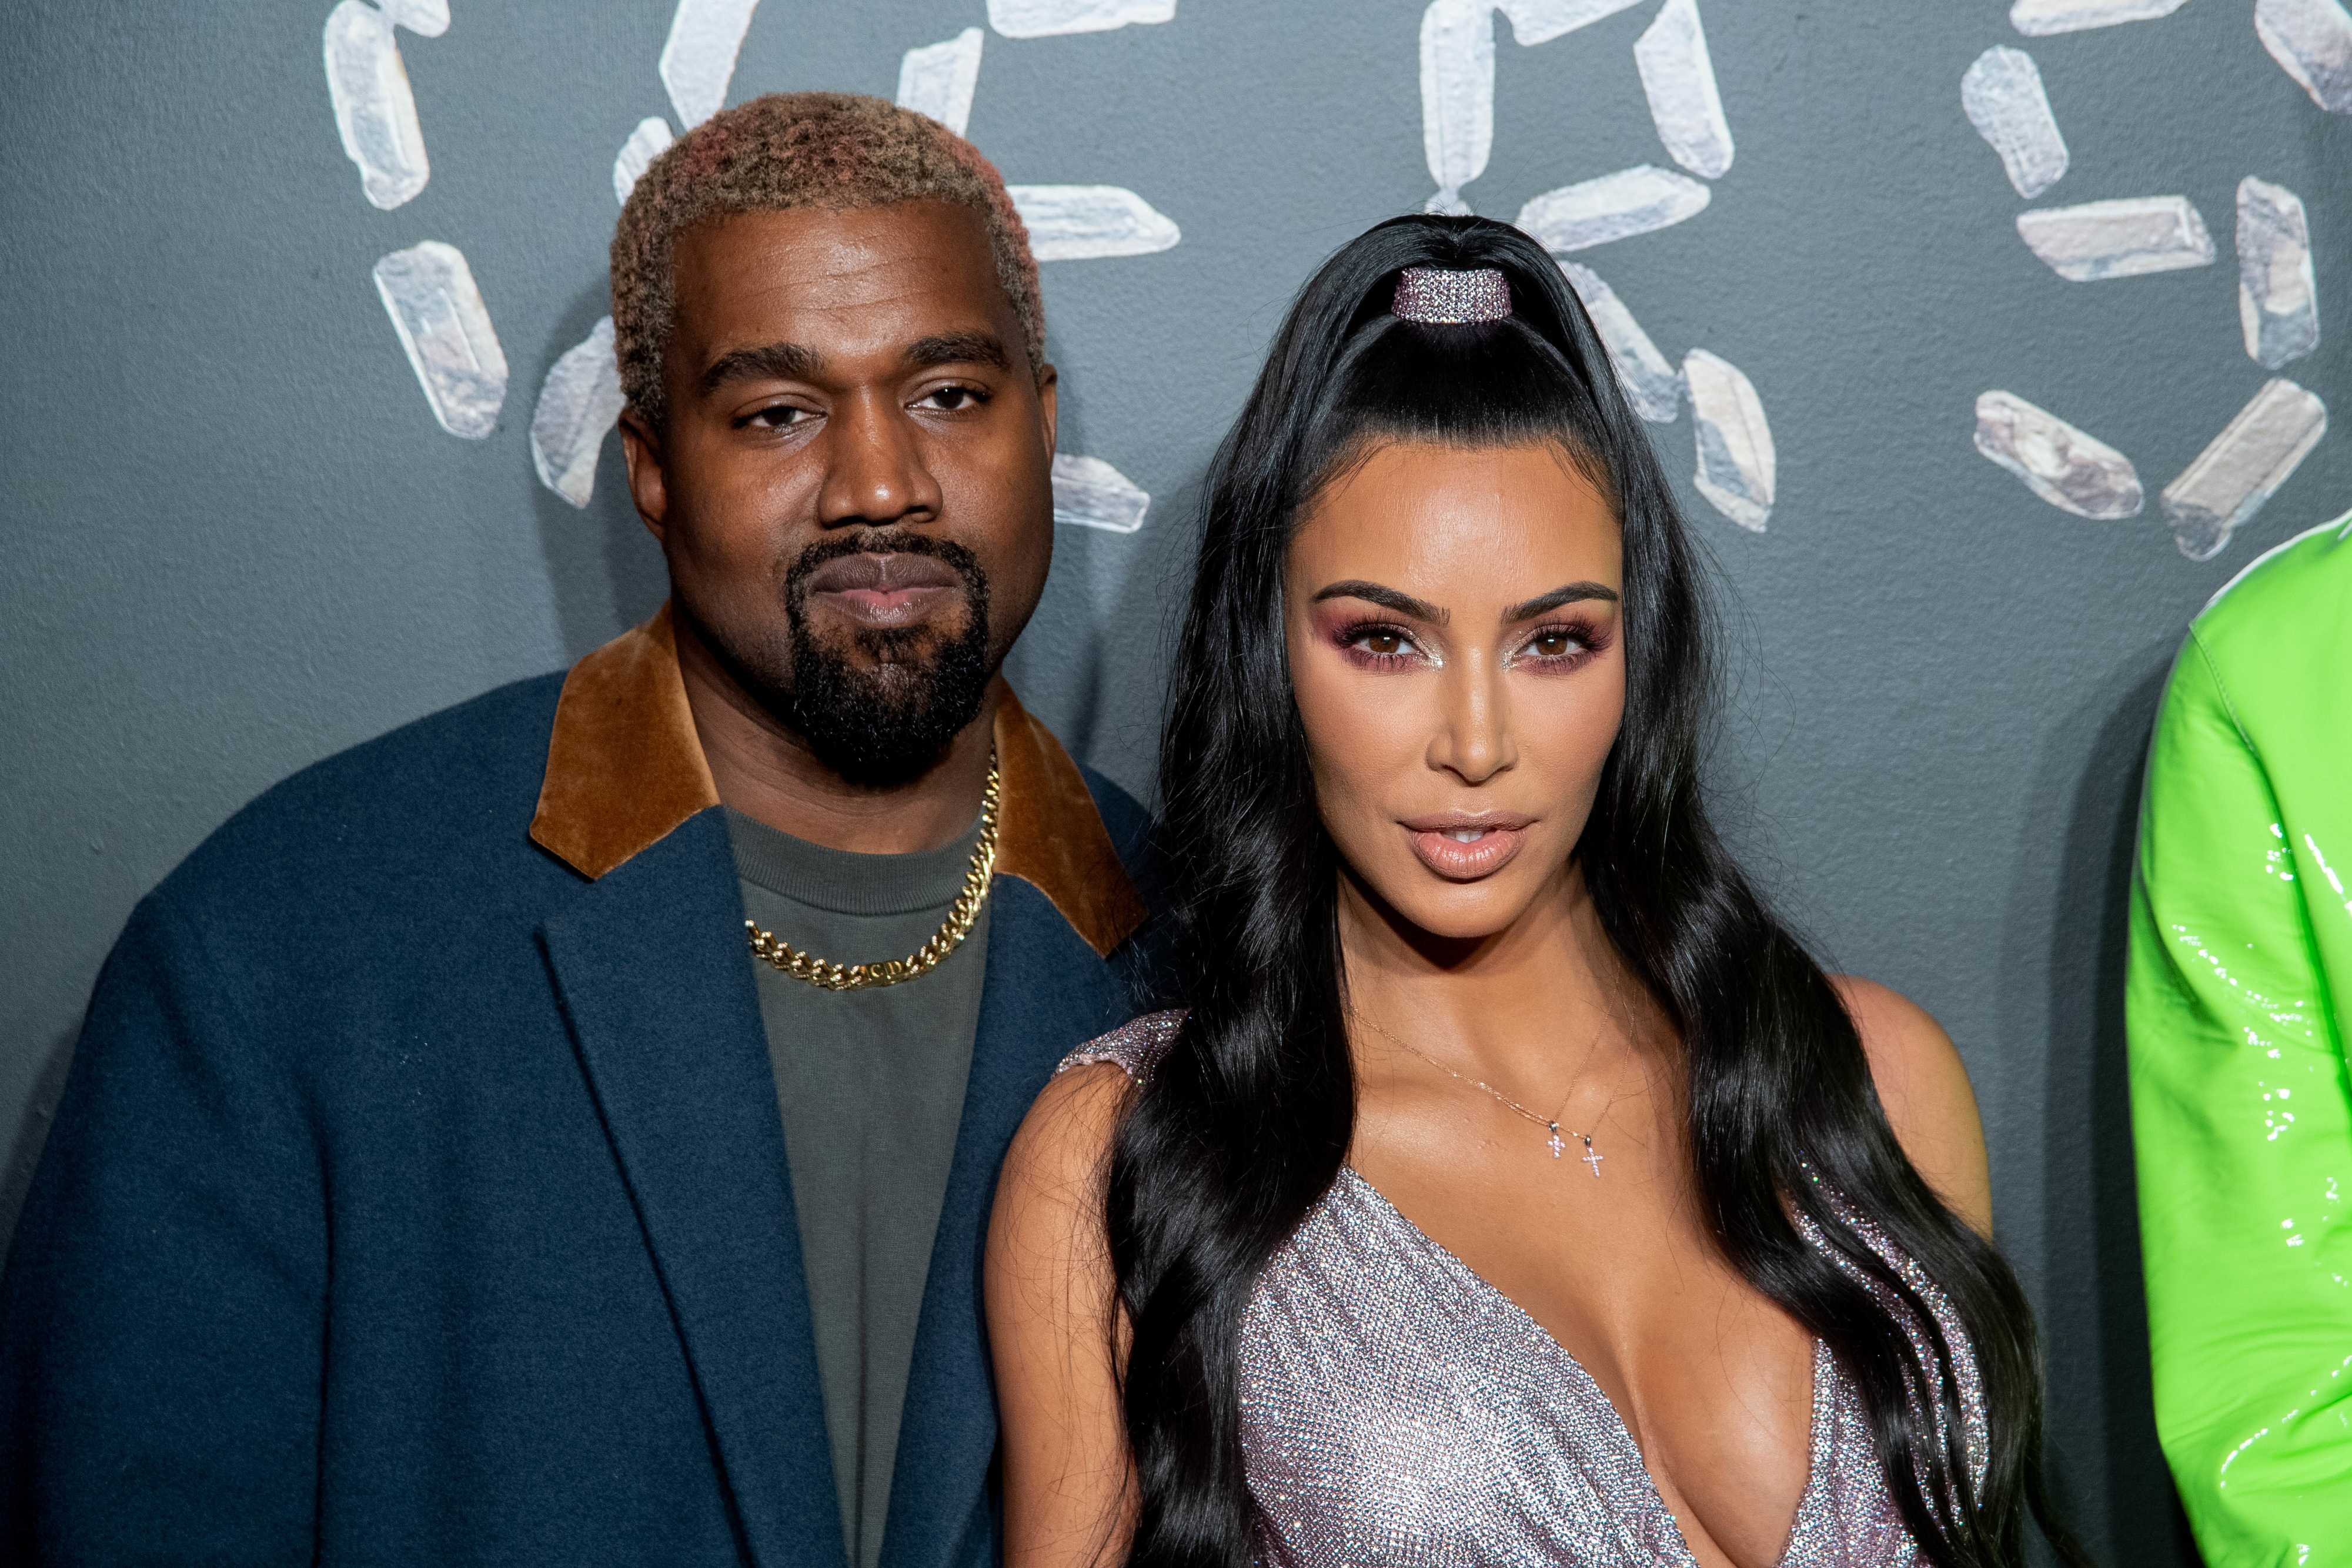 Closeup of Ye and Kim on the red carpet